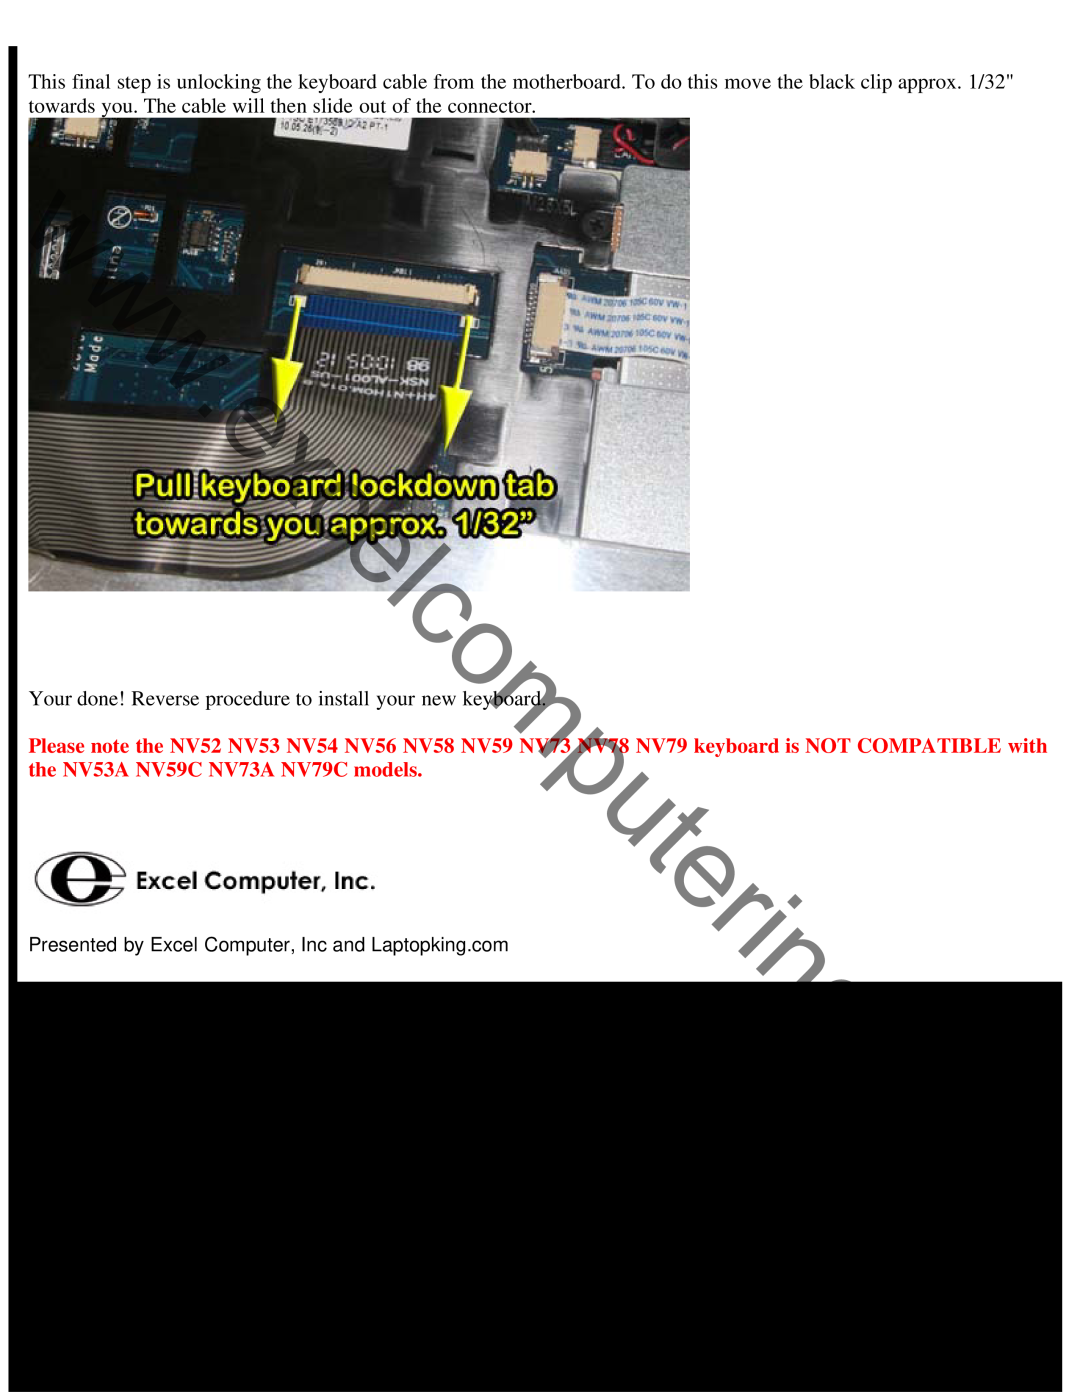 Gateway NV55C, NV59C, NV53A service manual Presented by Excel Computer, Inc and Laptopking 